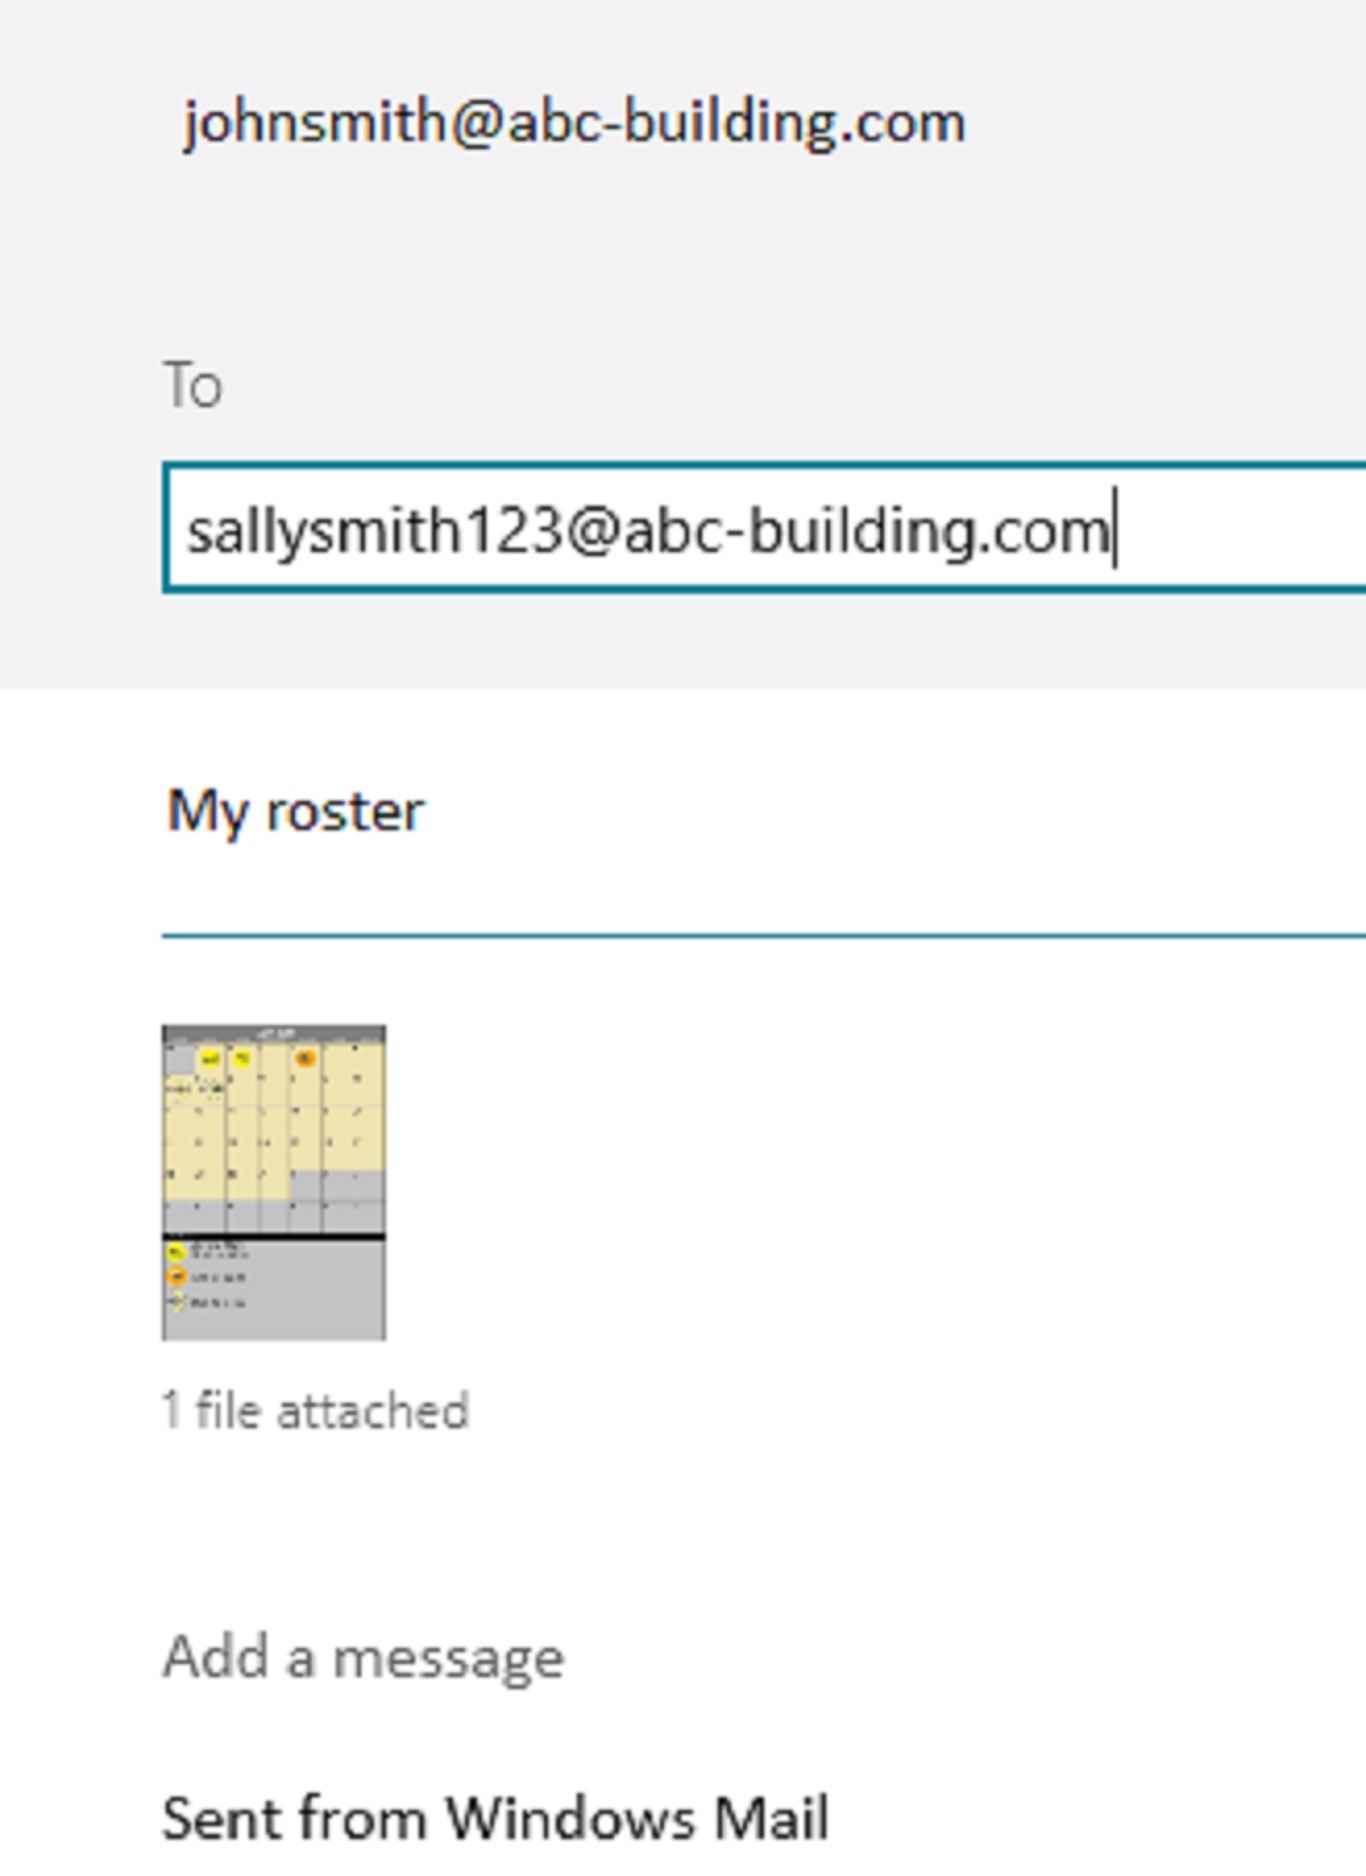 Use Windows 8 sharing to email an image of your roster to your friends and family.